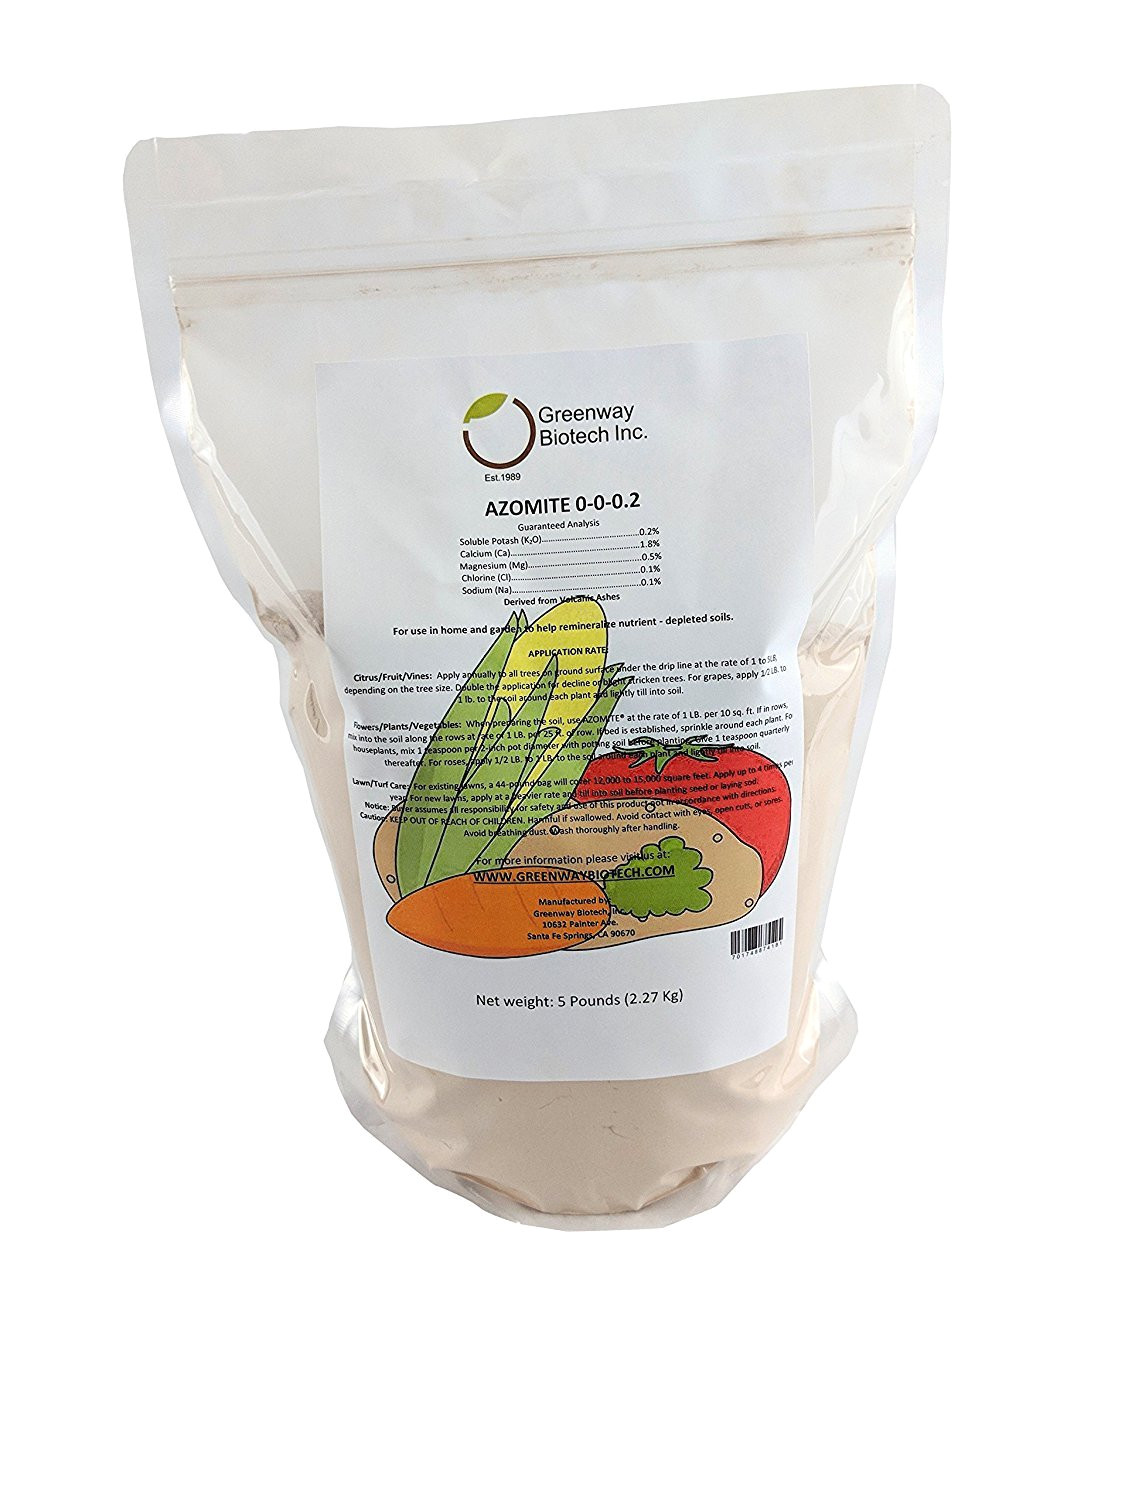 buy azomite rock dust volcanic ash organic trace minerals certified dealer organic trace minerals greenway biotech brand 5 pounds online at low prices